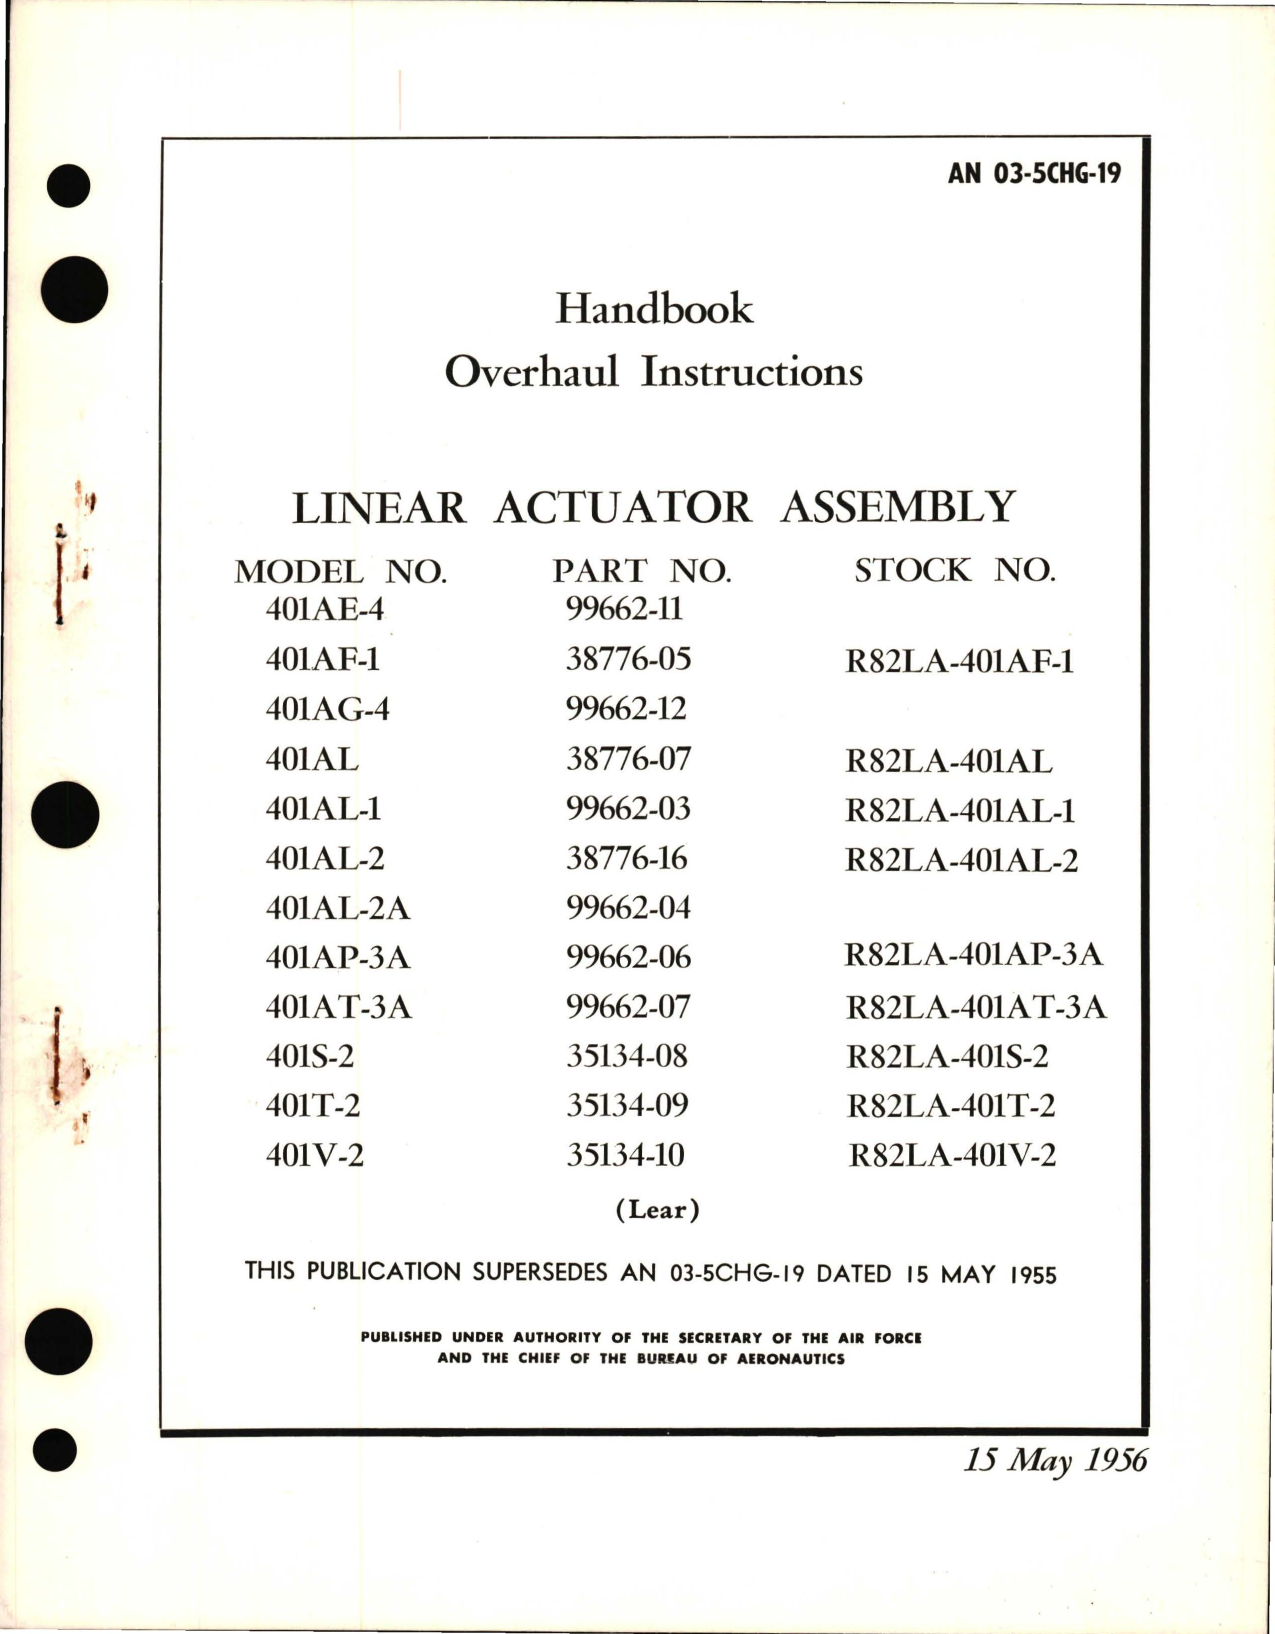 Sample page 1 from AirCorps Library document: Overhaul Instructions for Lear Linear Actuator Assembly 401